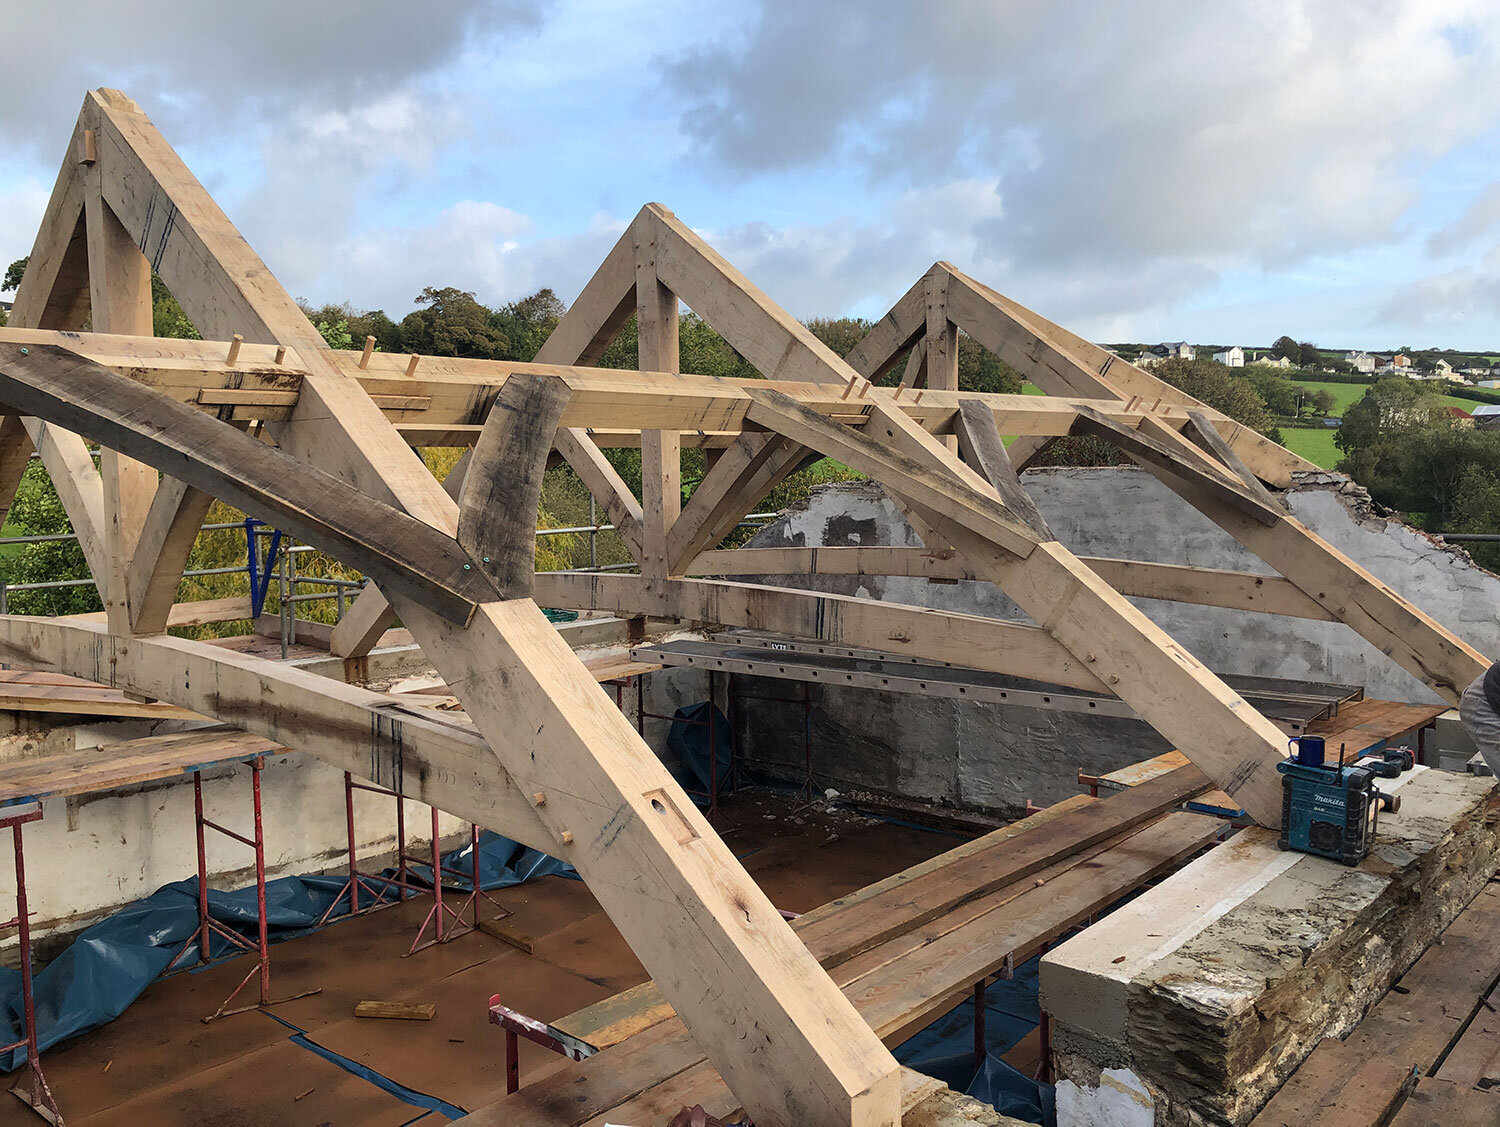 Pegged timber roof under construction on stone building